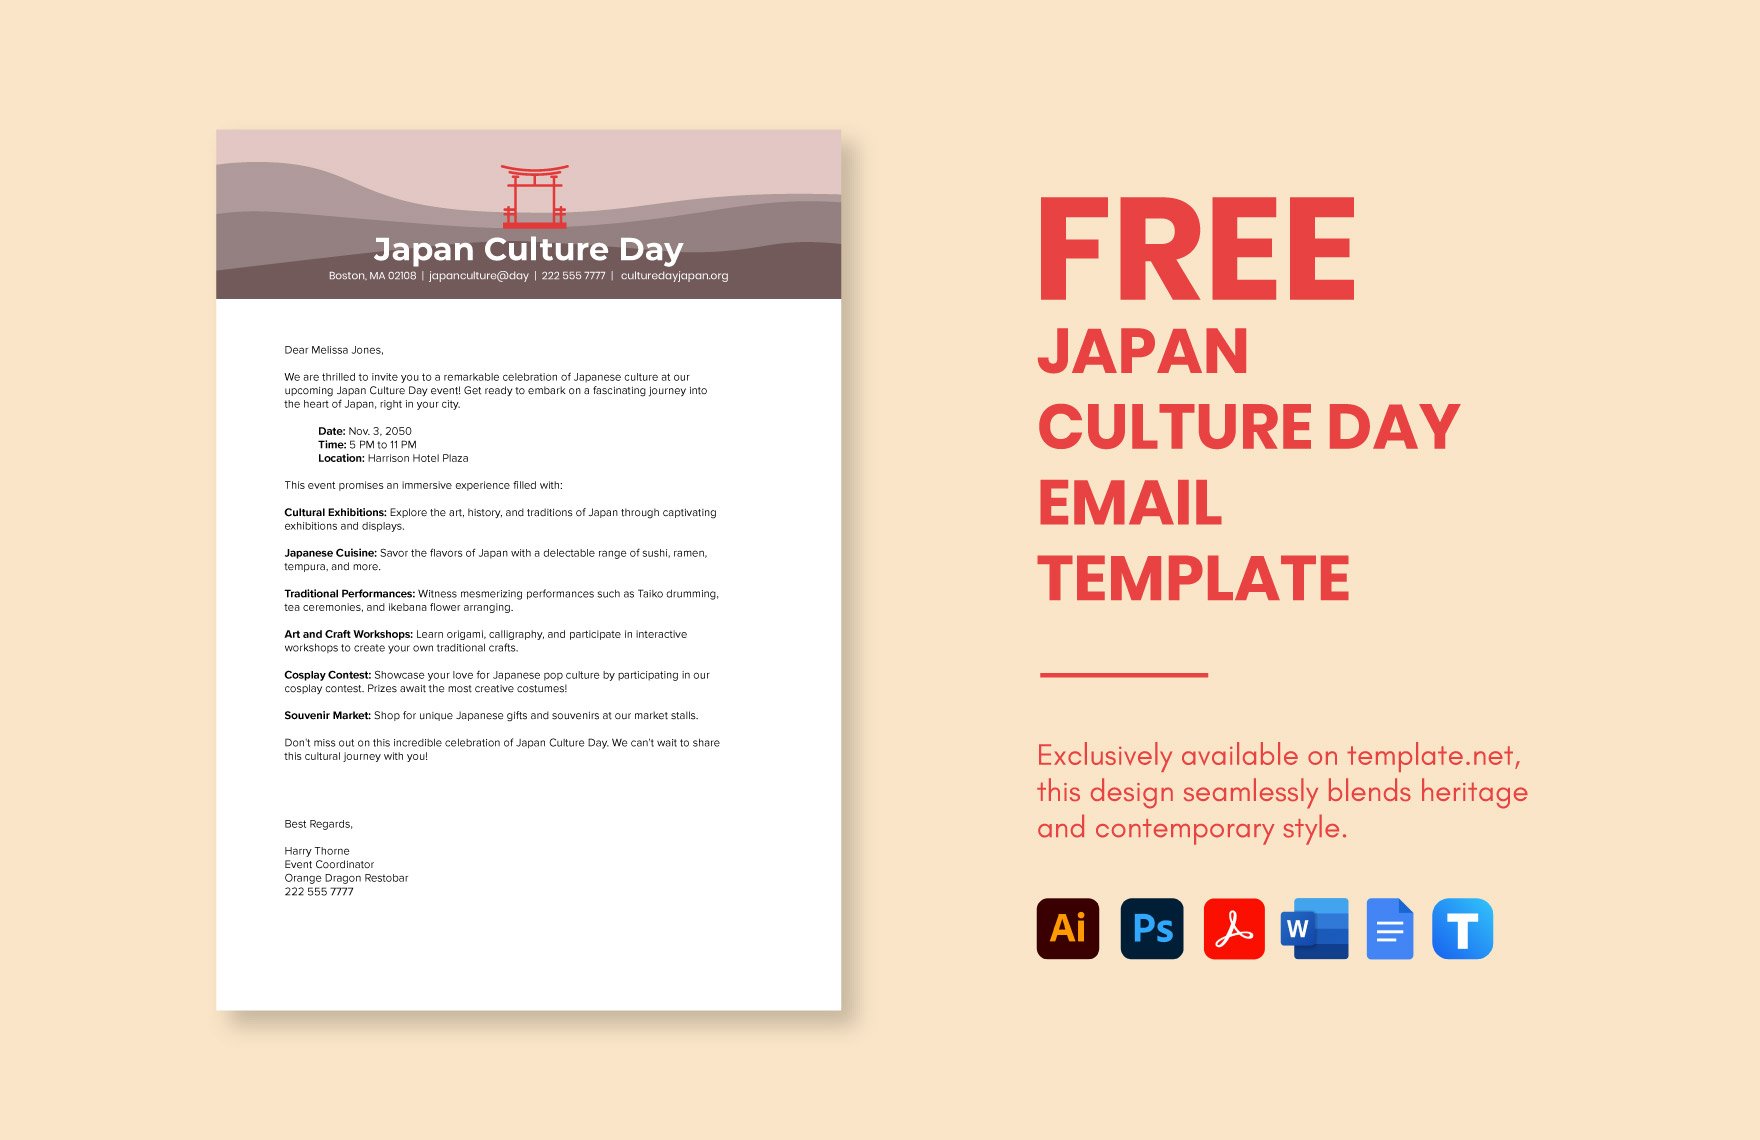 Japan Culture Day Email Template in Word, Google Docs, PDF, Illustrator, PSD